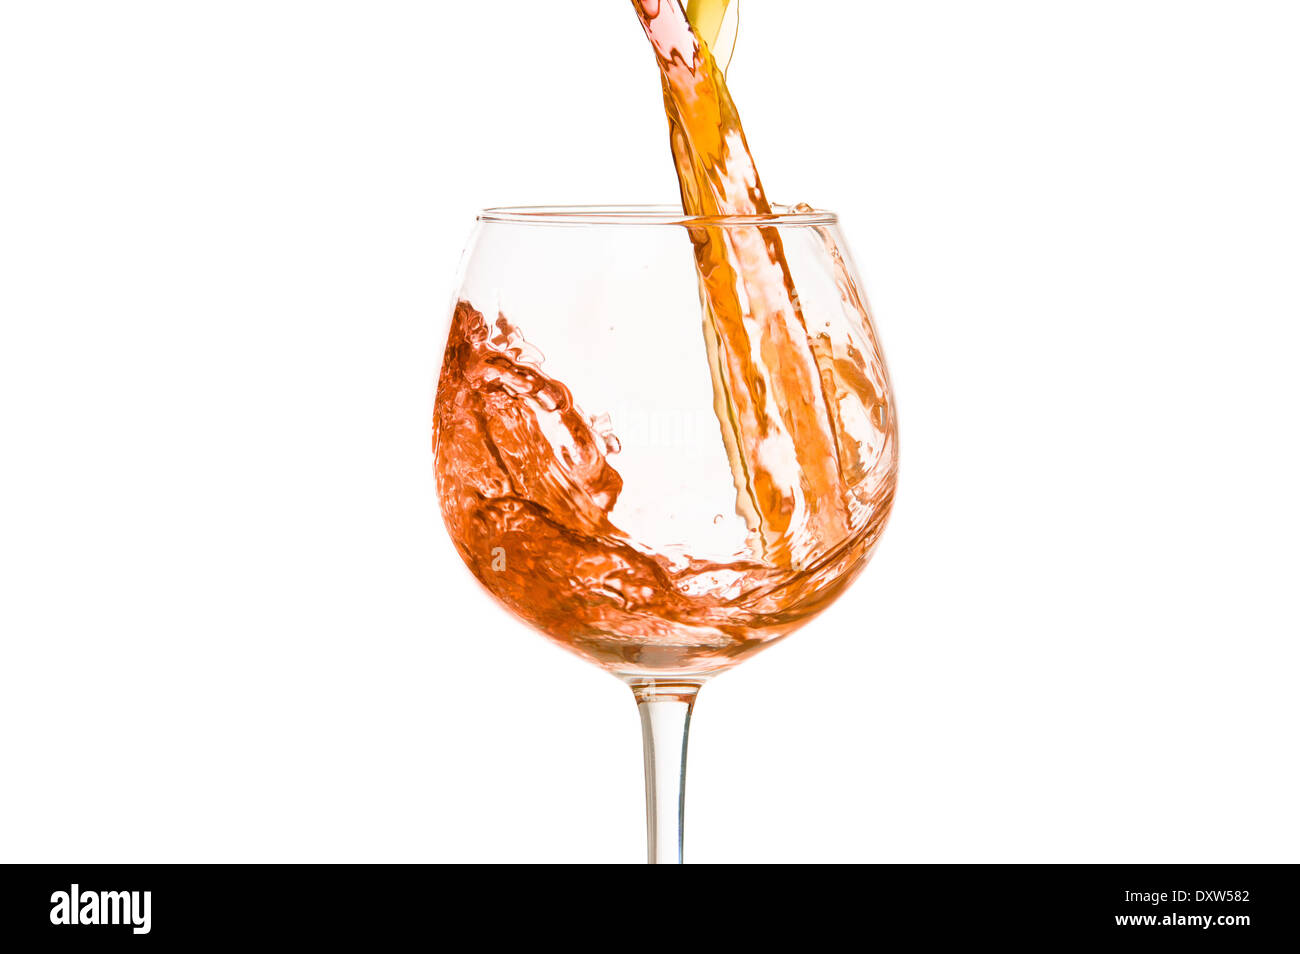 https://c8.alamy.com/comp/DXW582/wine-and-a-glass-pouring-on-a-white-background-DXW582.jpg